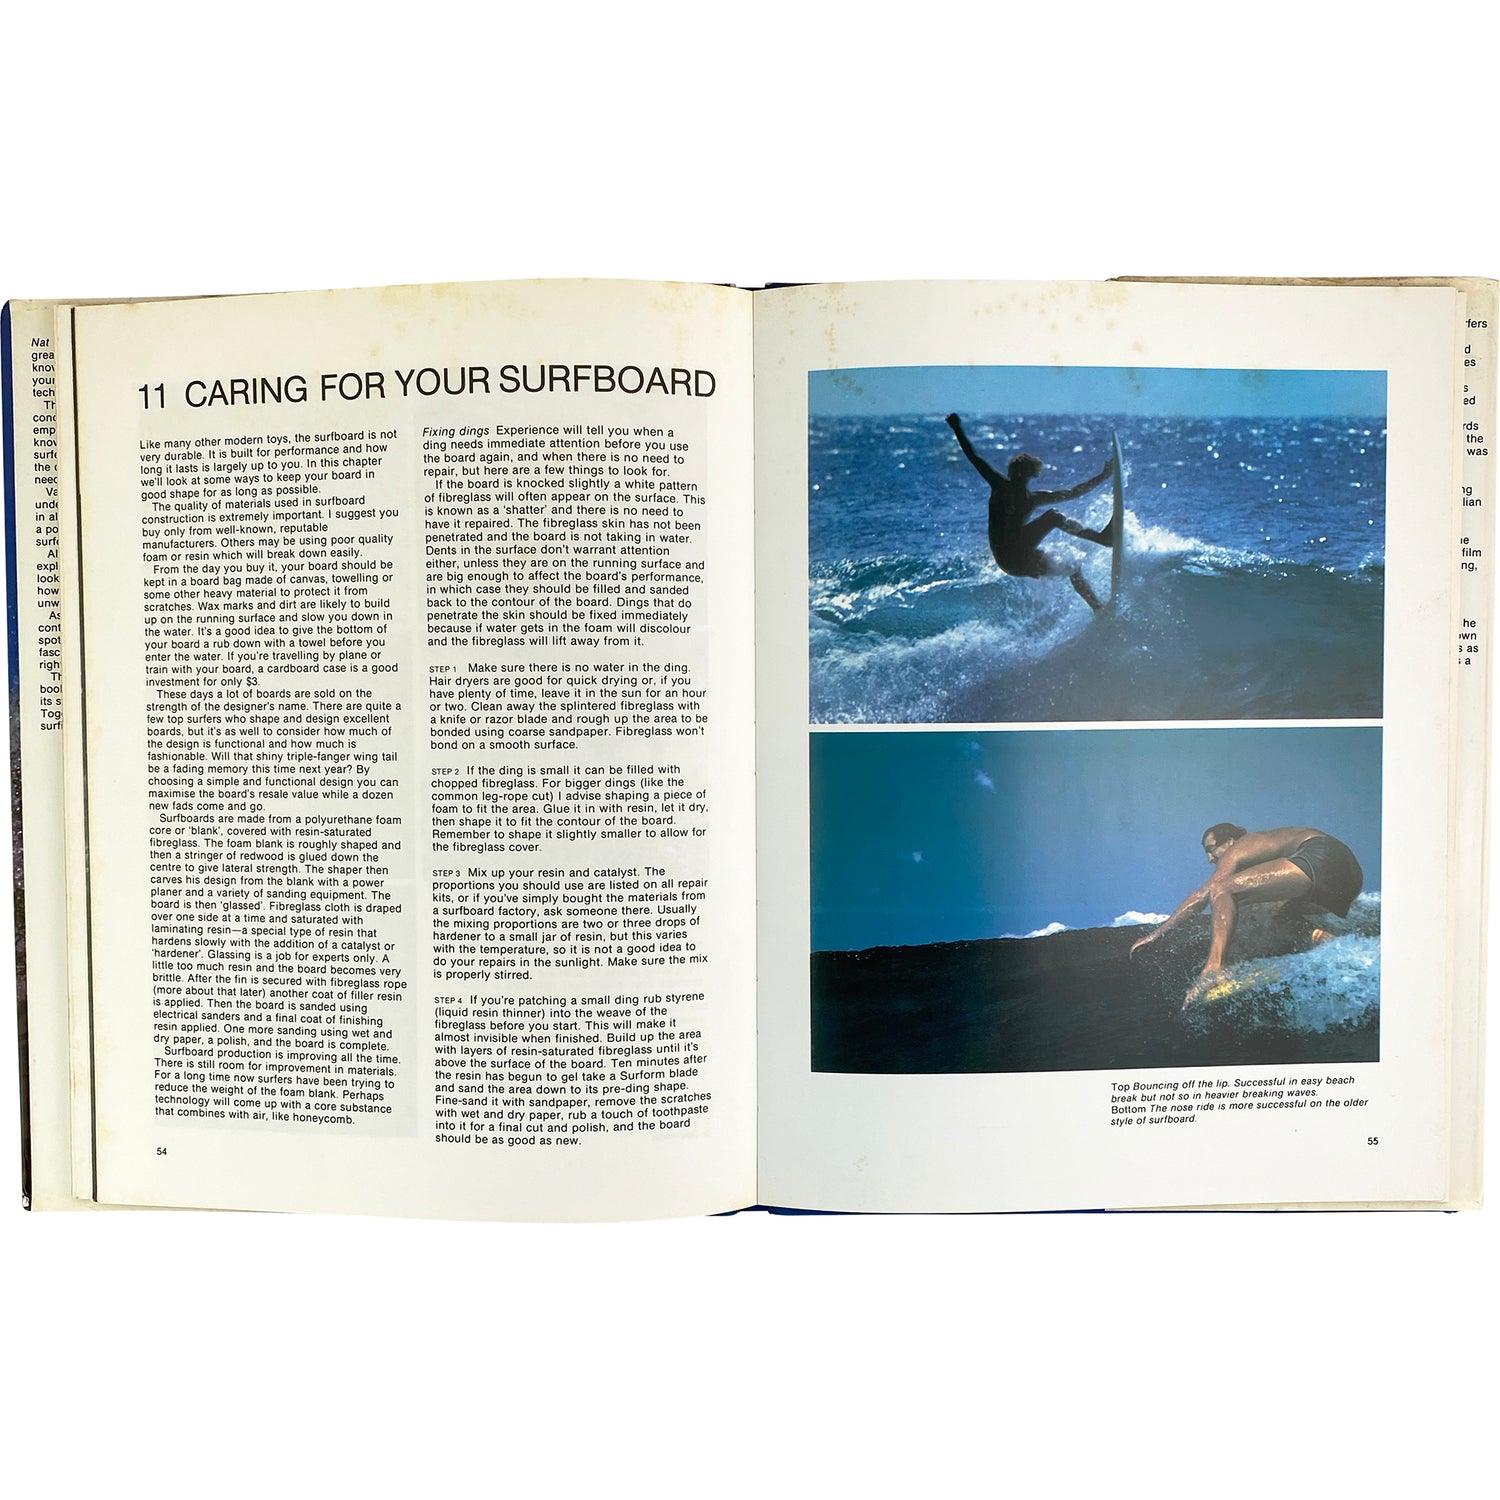 NAT YOUNG'S BOOK OF SURFING